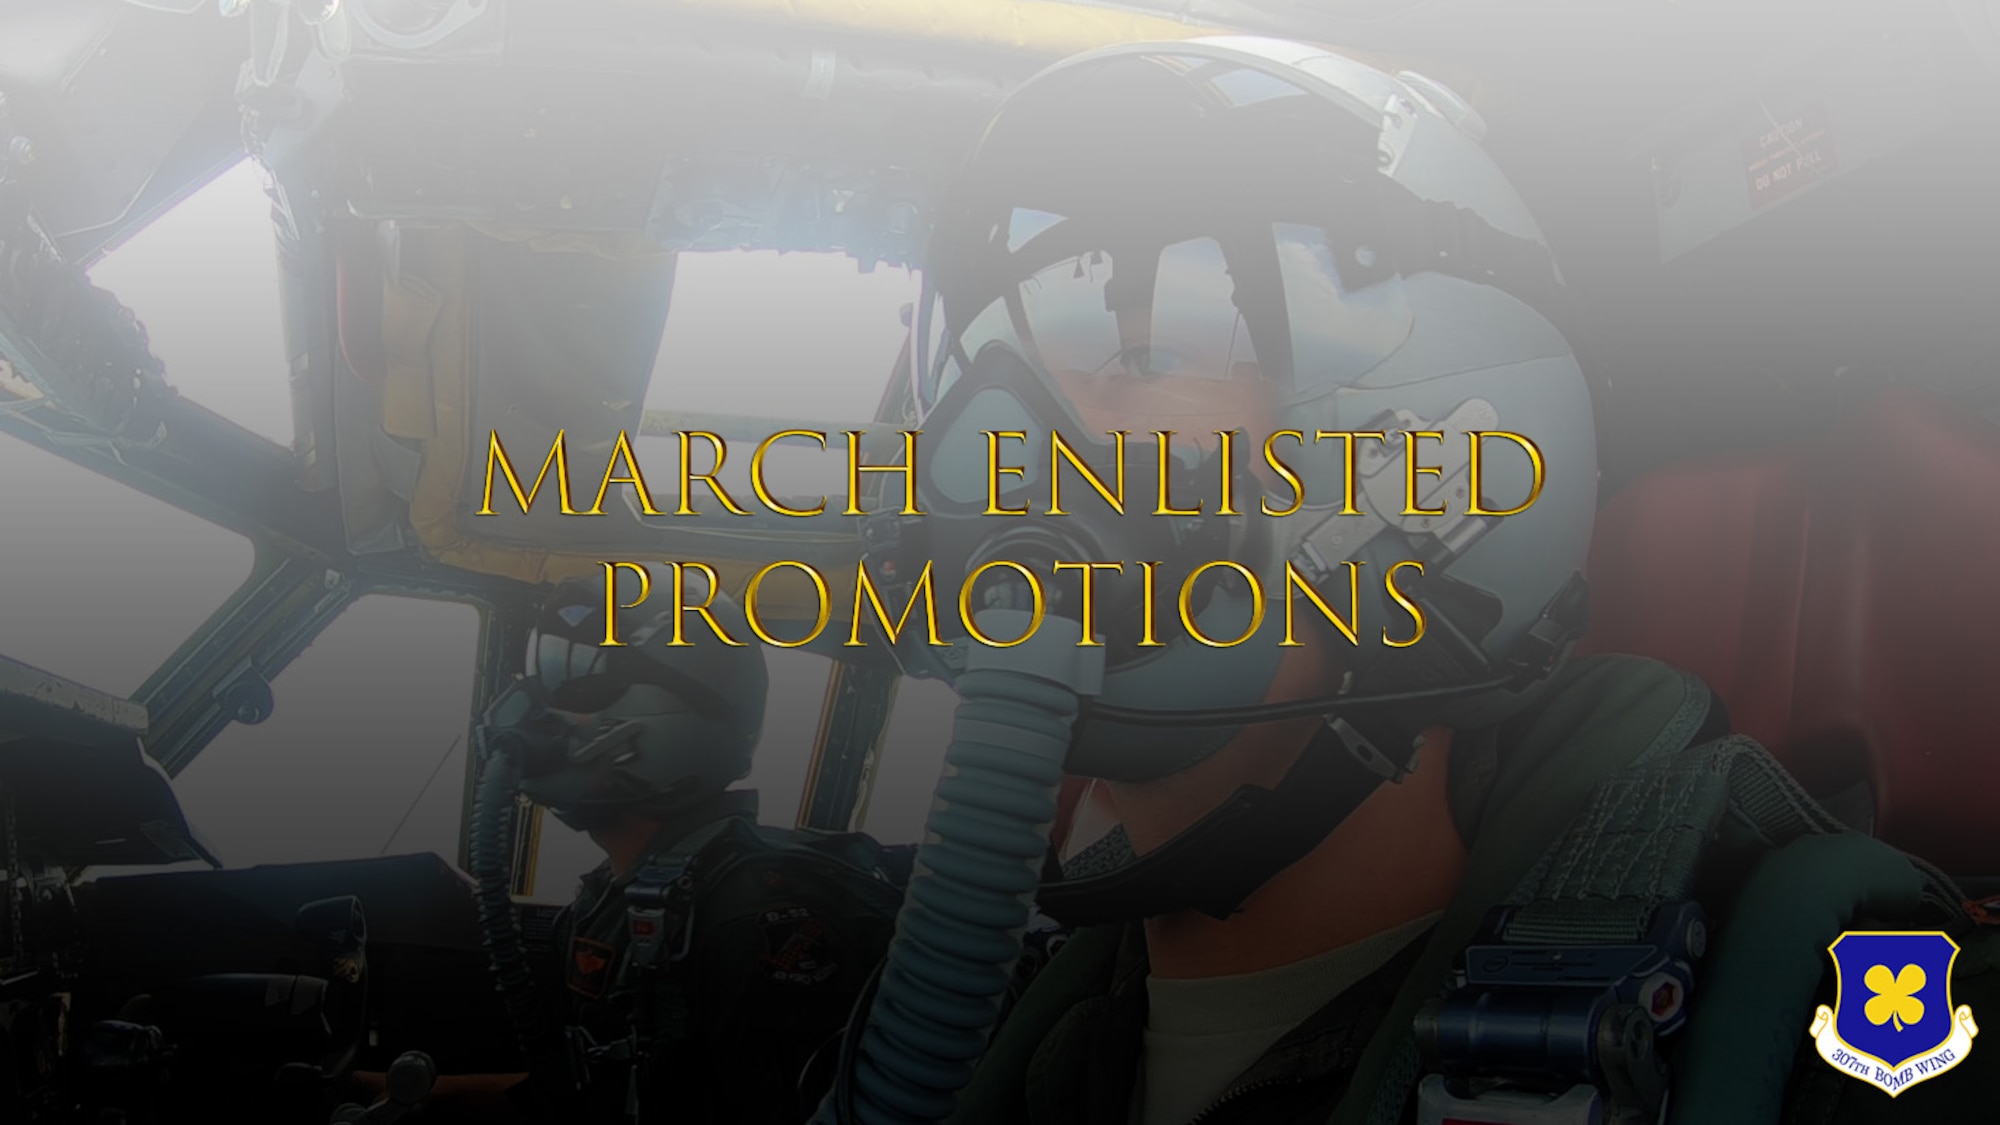 This is an image of 2 airmen flying a jet with masks on. The photo has a gray filter on it and reads "March Enlisted Promotions" on the top. In the bottom right corner of the photo is a 307th Bomb Wing logo